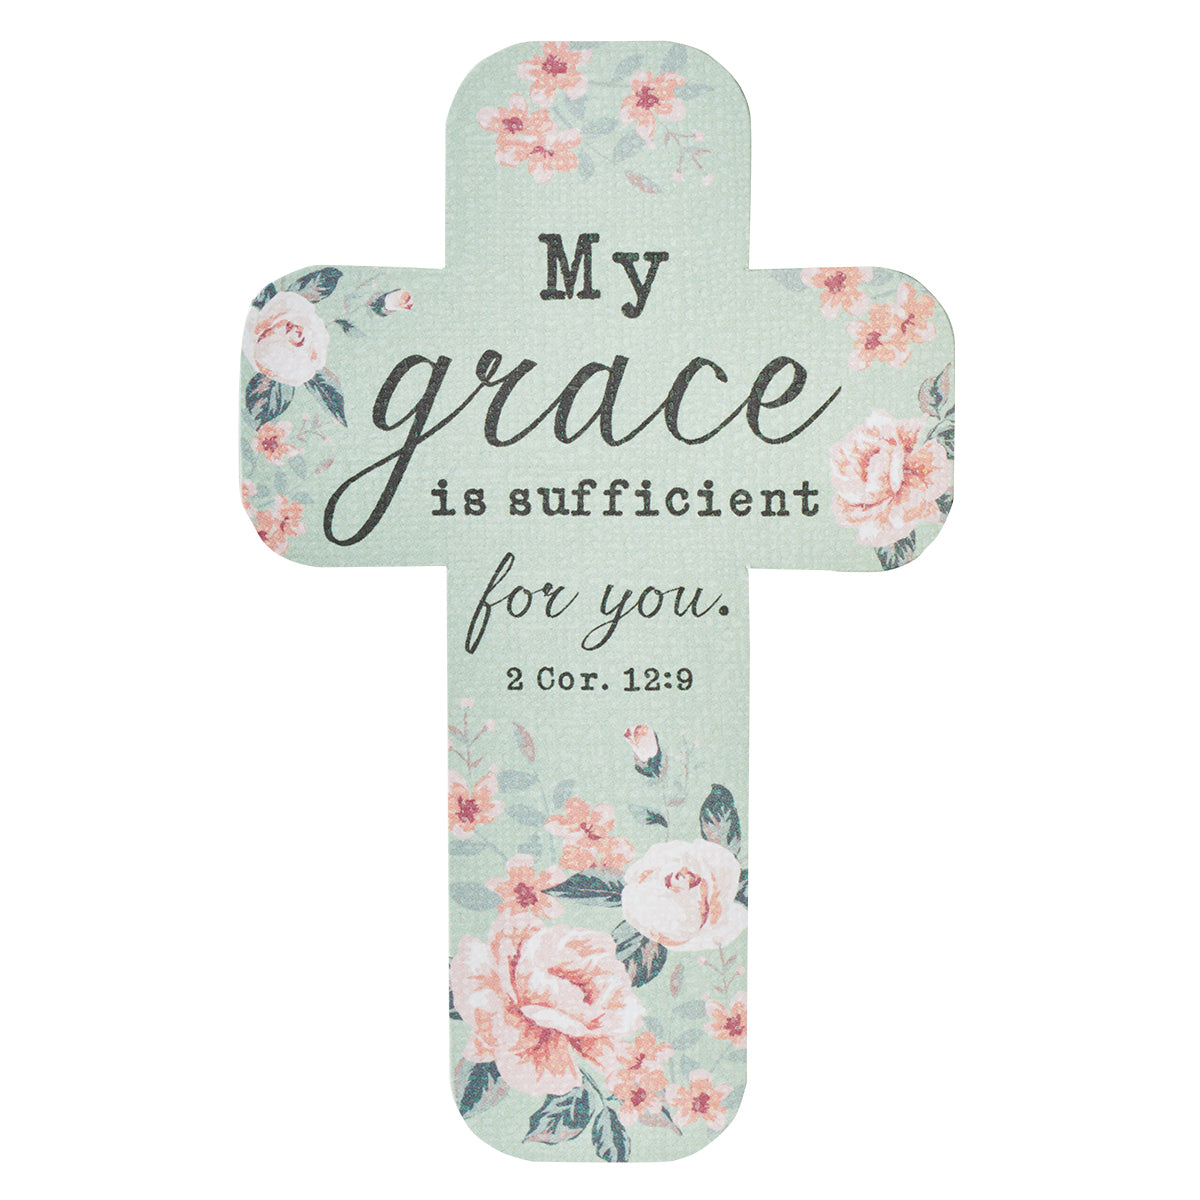 Image of My Grace Is Sufficient Cross Bookmark Set - 2 Corinthians 12:9 other